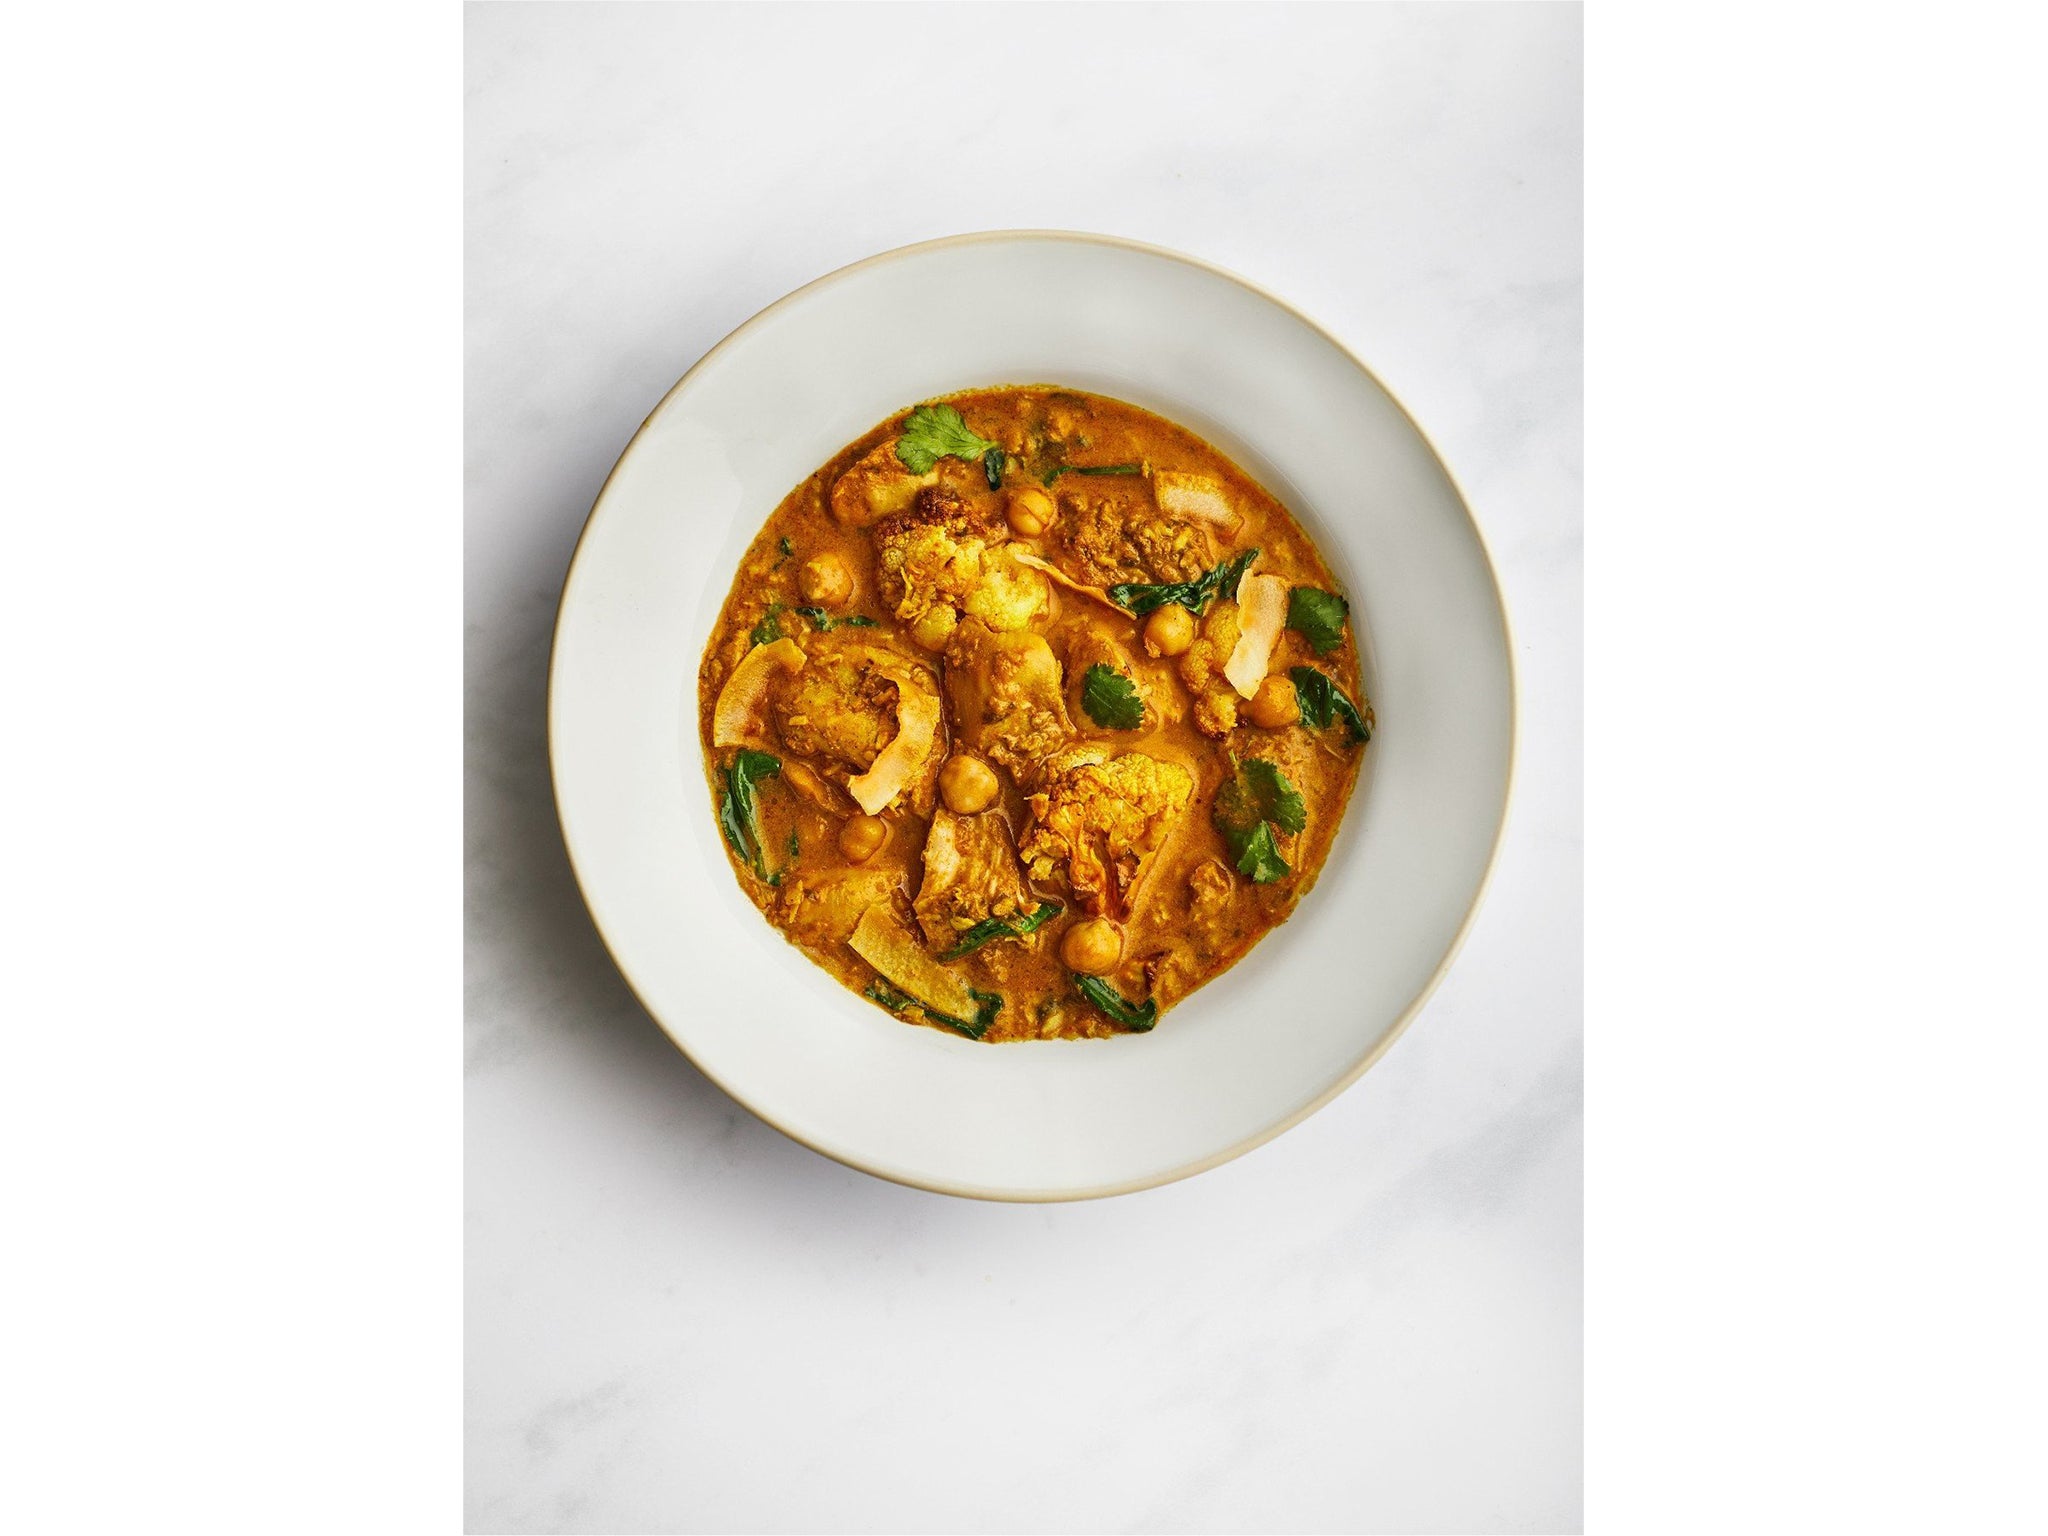 Swap your usual Indian takeaway for these delicious frozen meals